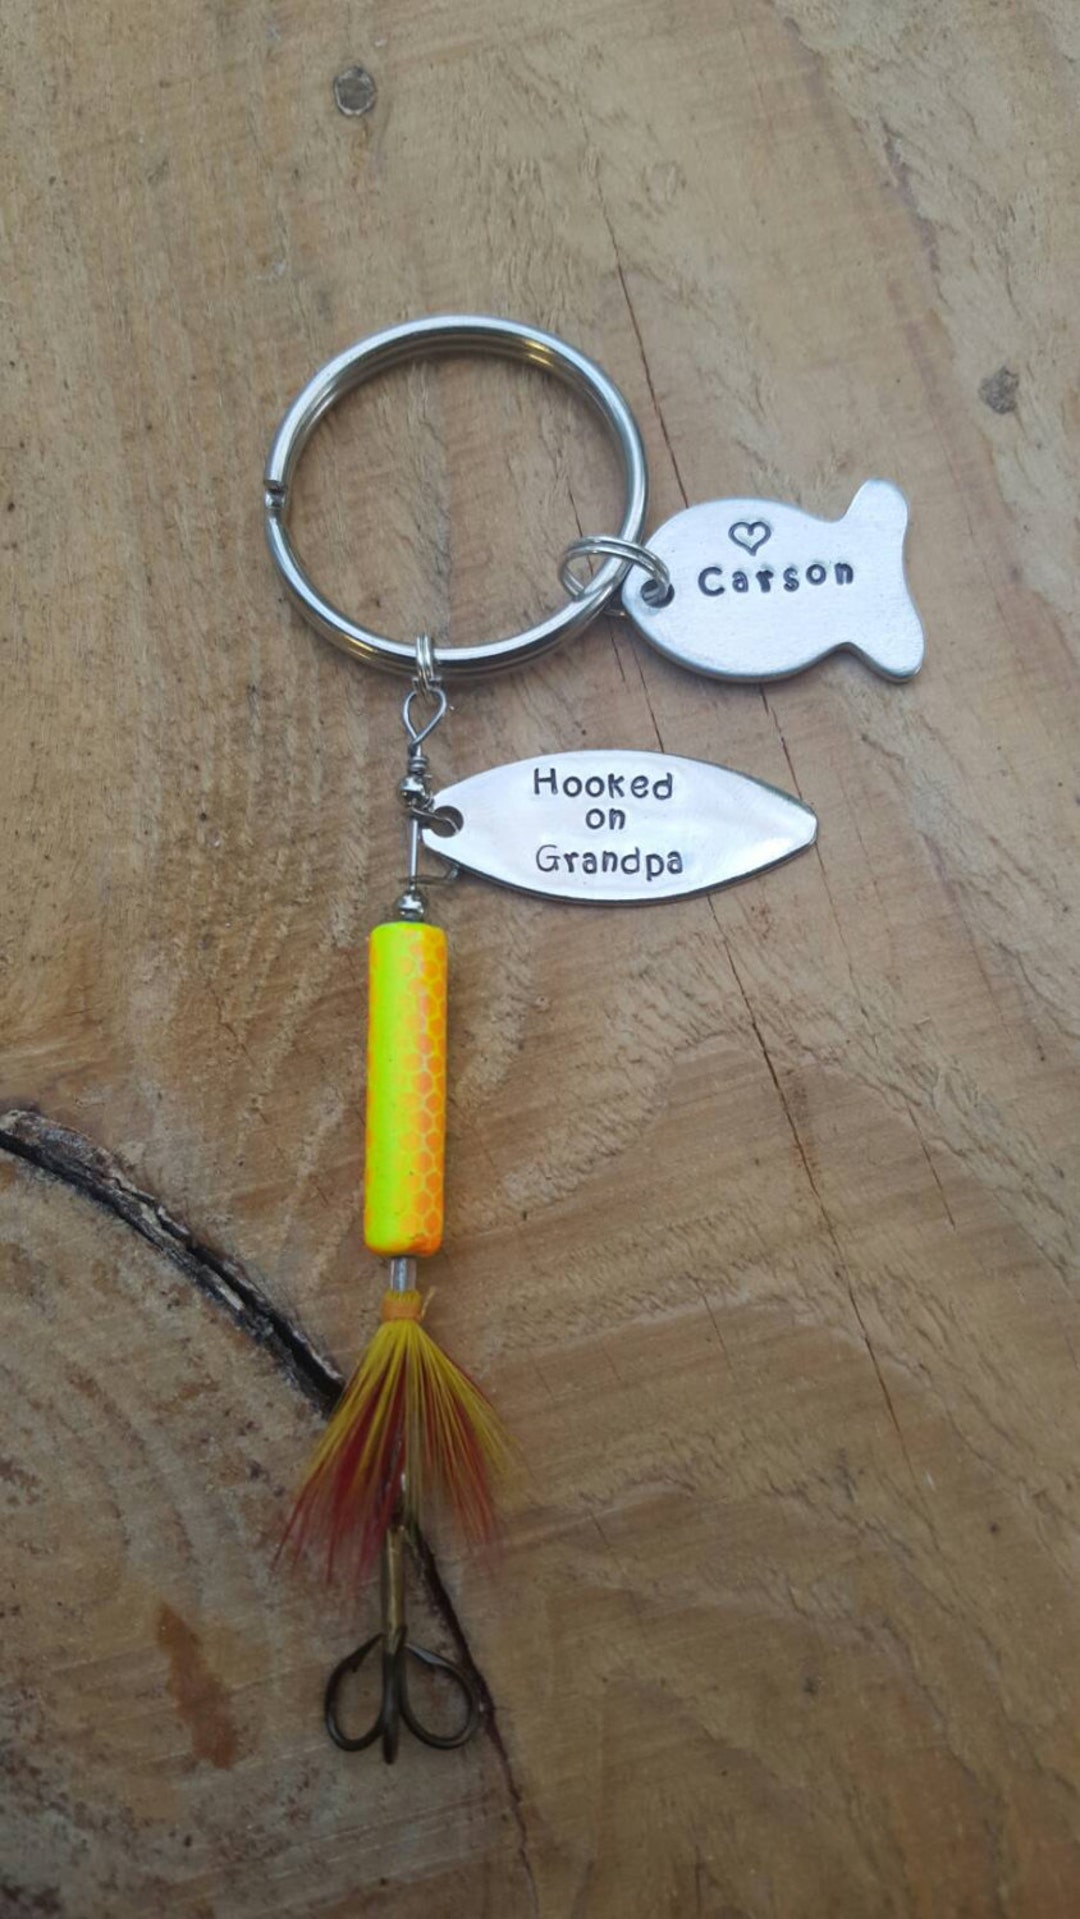 moeshandcrafted Fishing Lure Key Chain with Fish Names Hand Stamped, Personalized, Customized